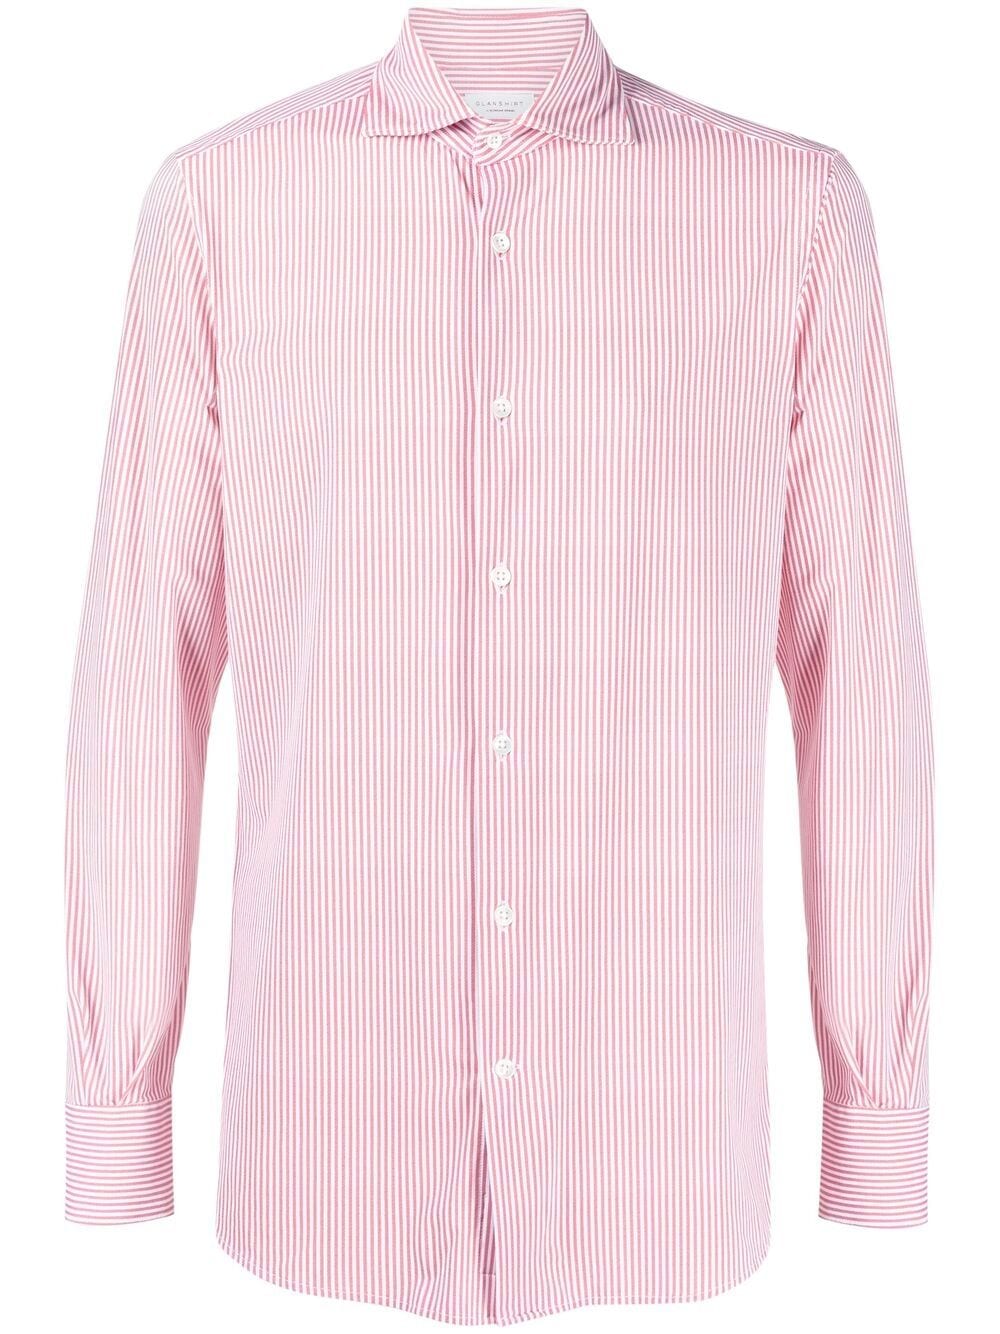 Glanshirt Striped Button-up Shirt In White